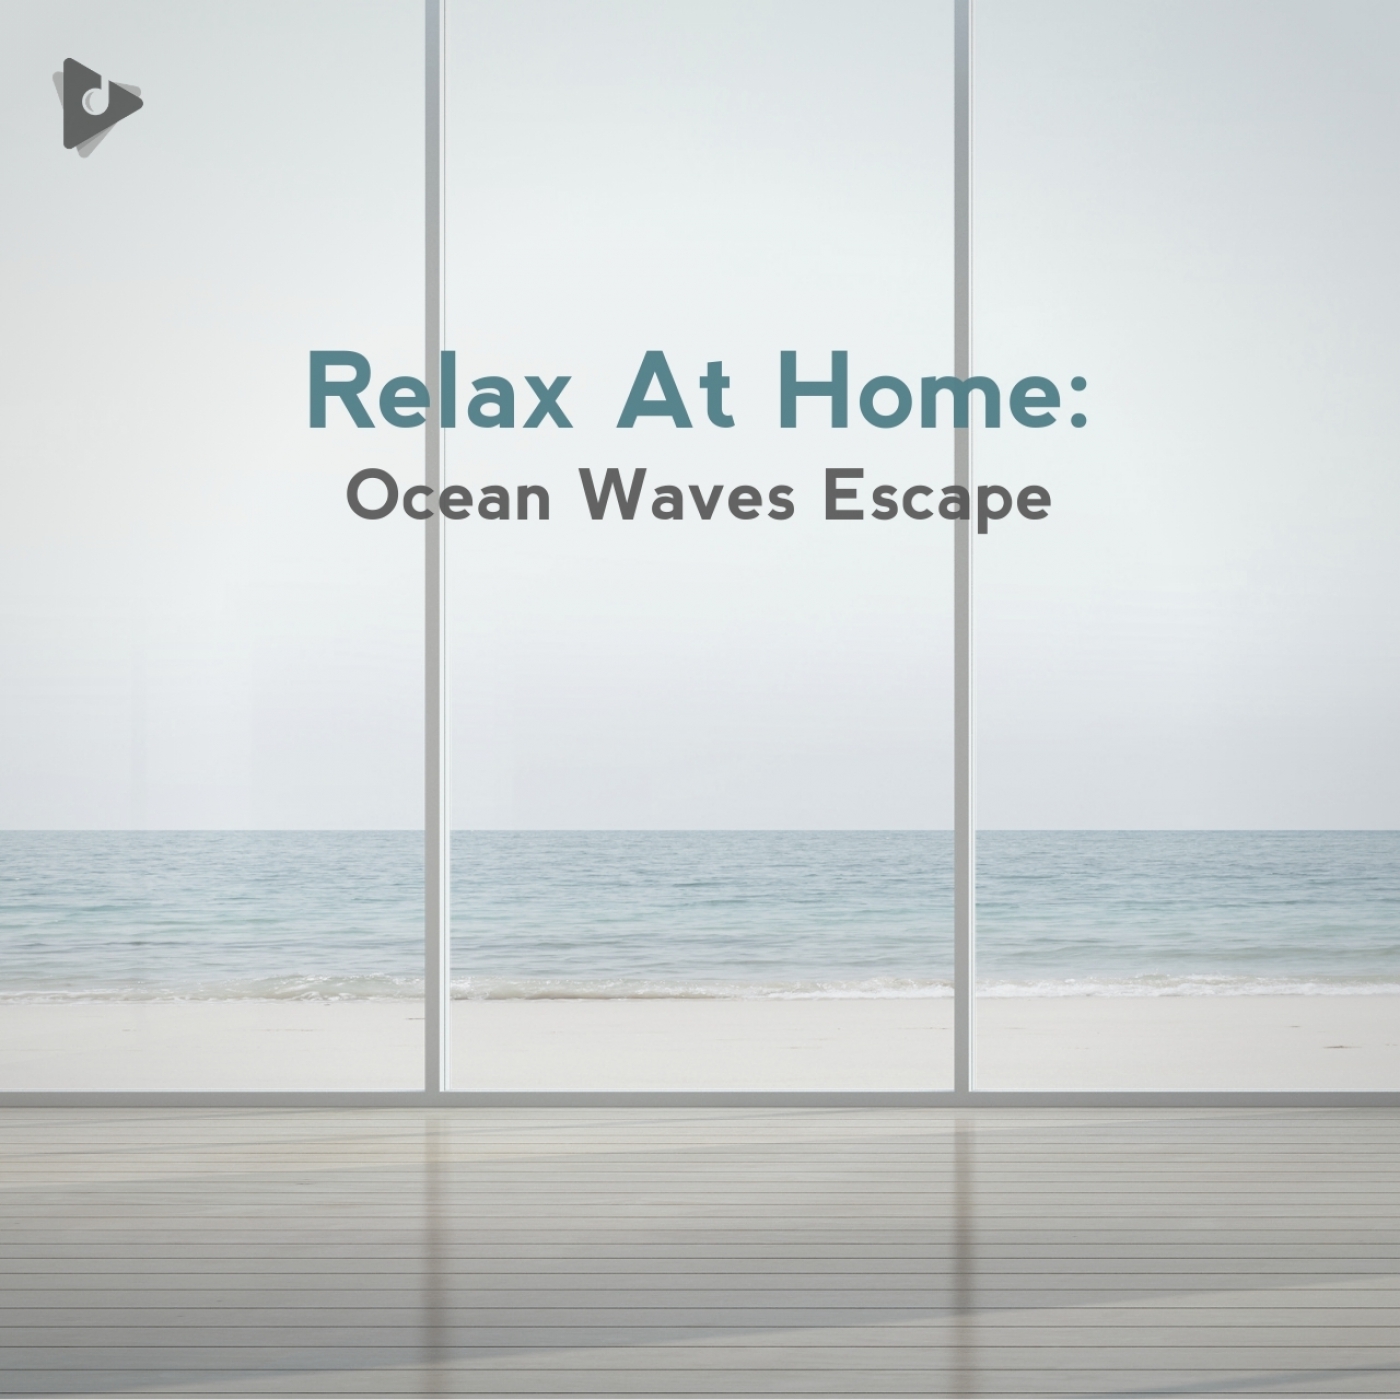 Relax At Home: Ocean Waves Escape